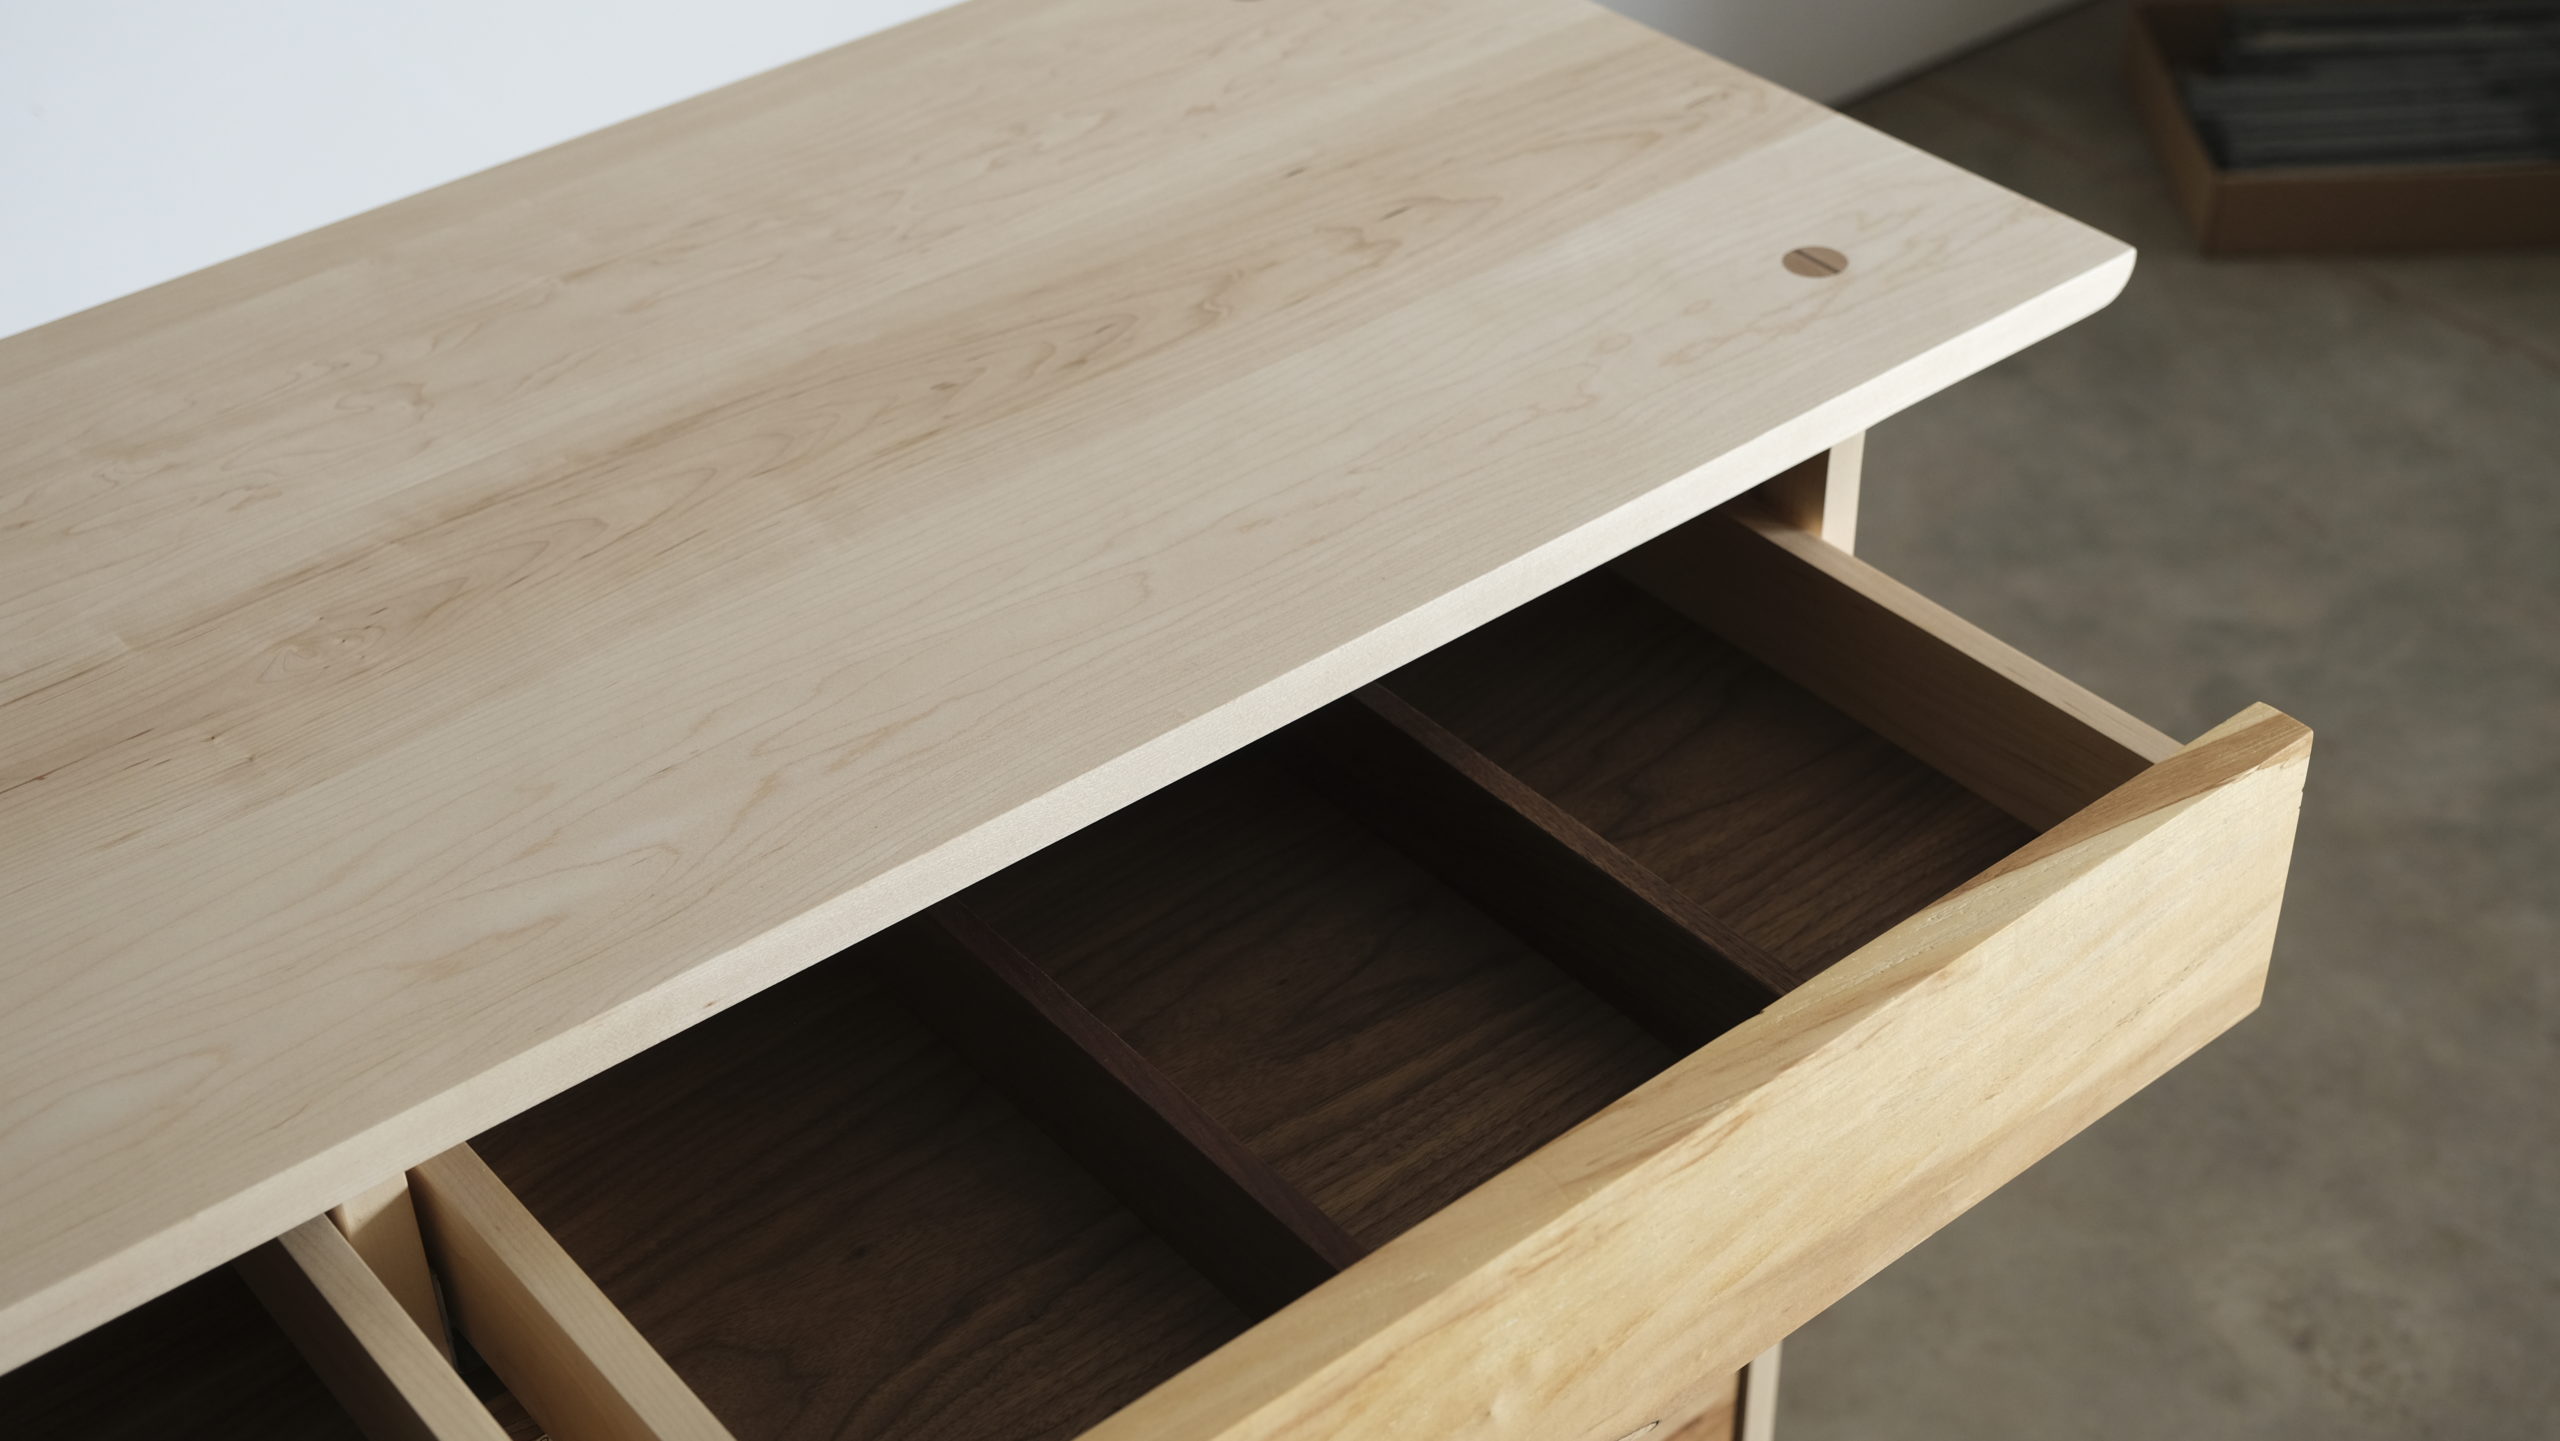 An open dresser drawer divided into three sections.